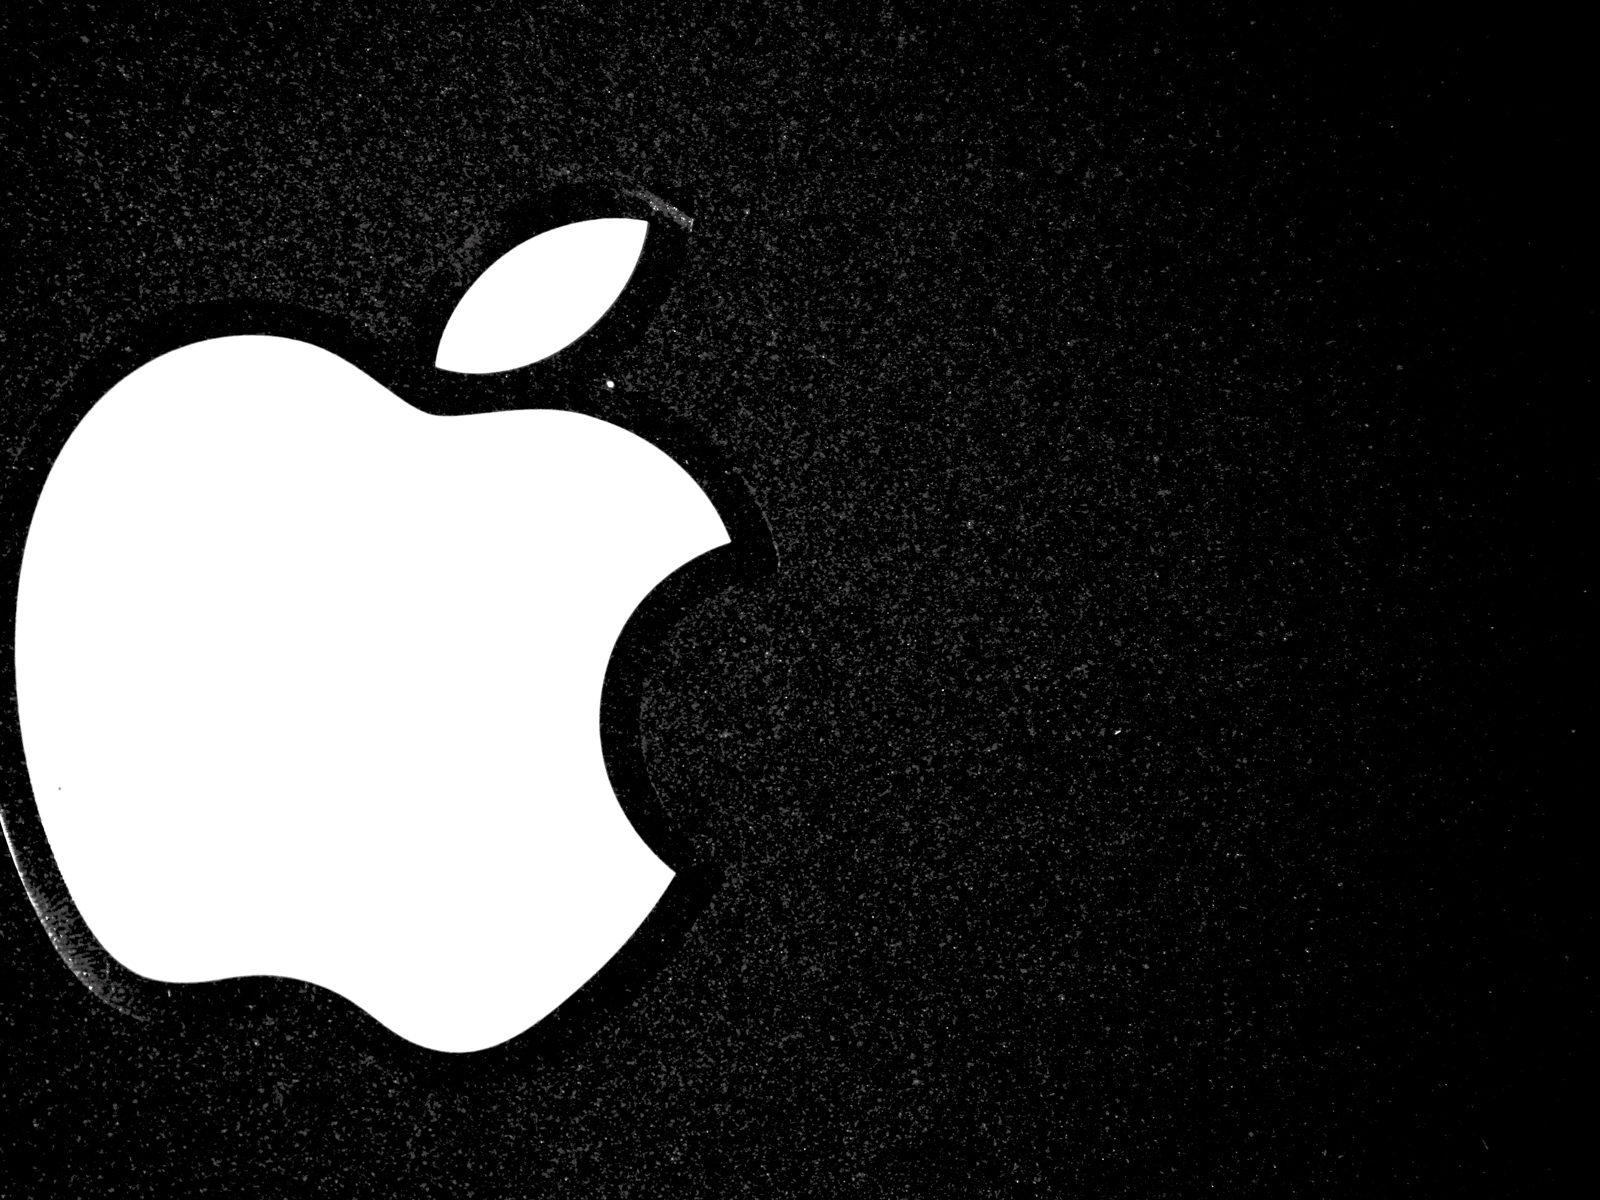 Apple Best Background Full HD1920x1080p, 1280x720p, – HD Wallpapers Backgrounds Desktop, iphone & Android Free Download